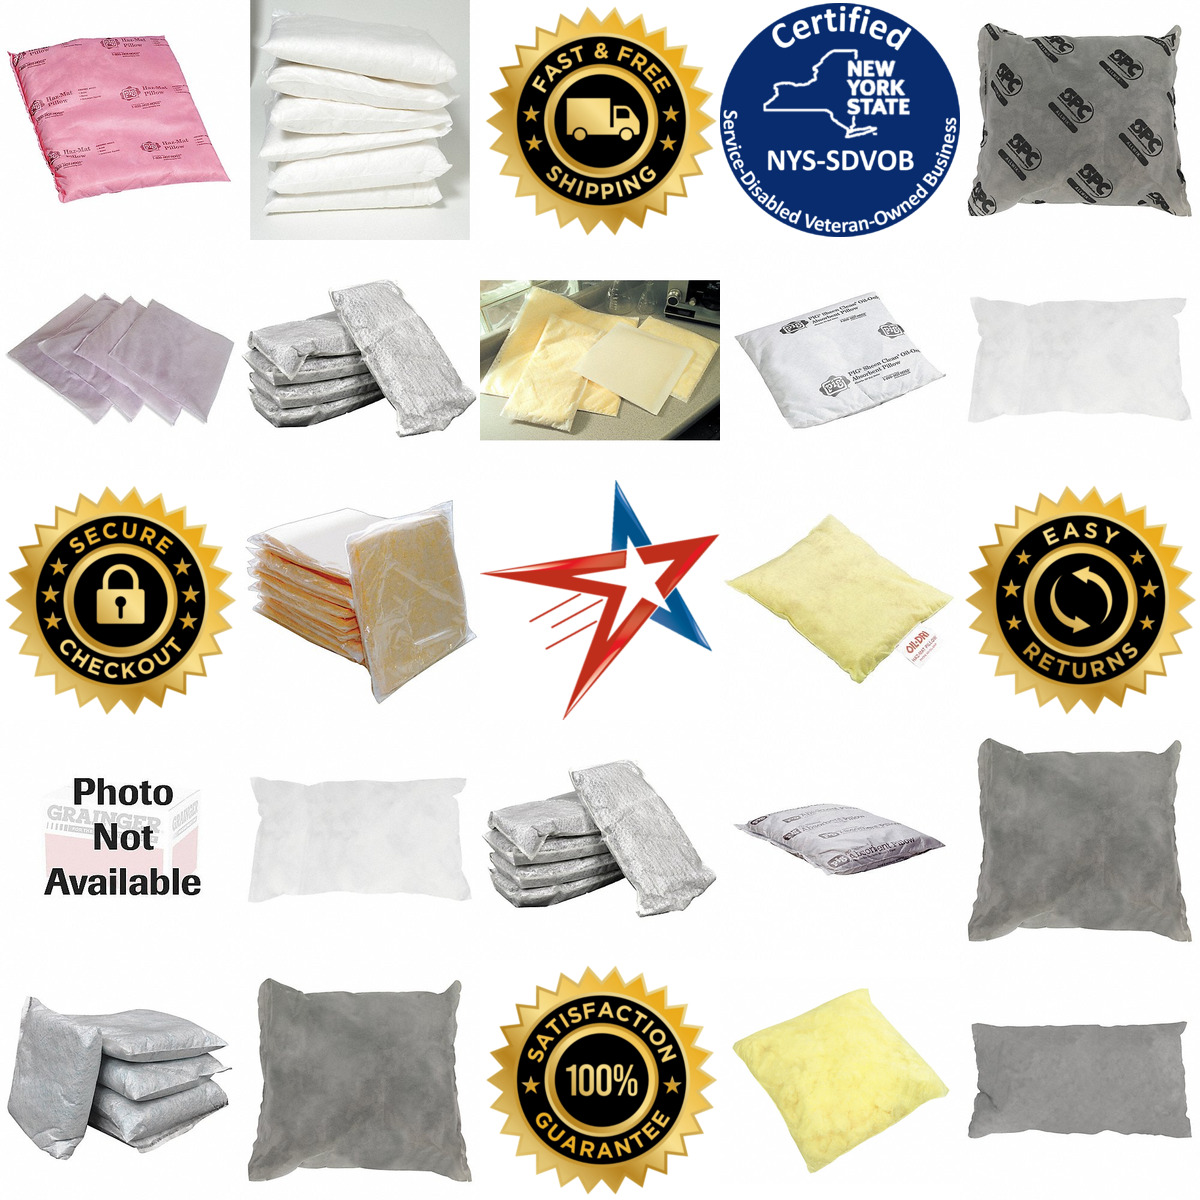 A selection of Sorbent Pillows and Blankets products on GoVets